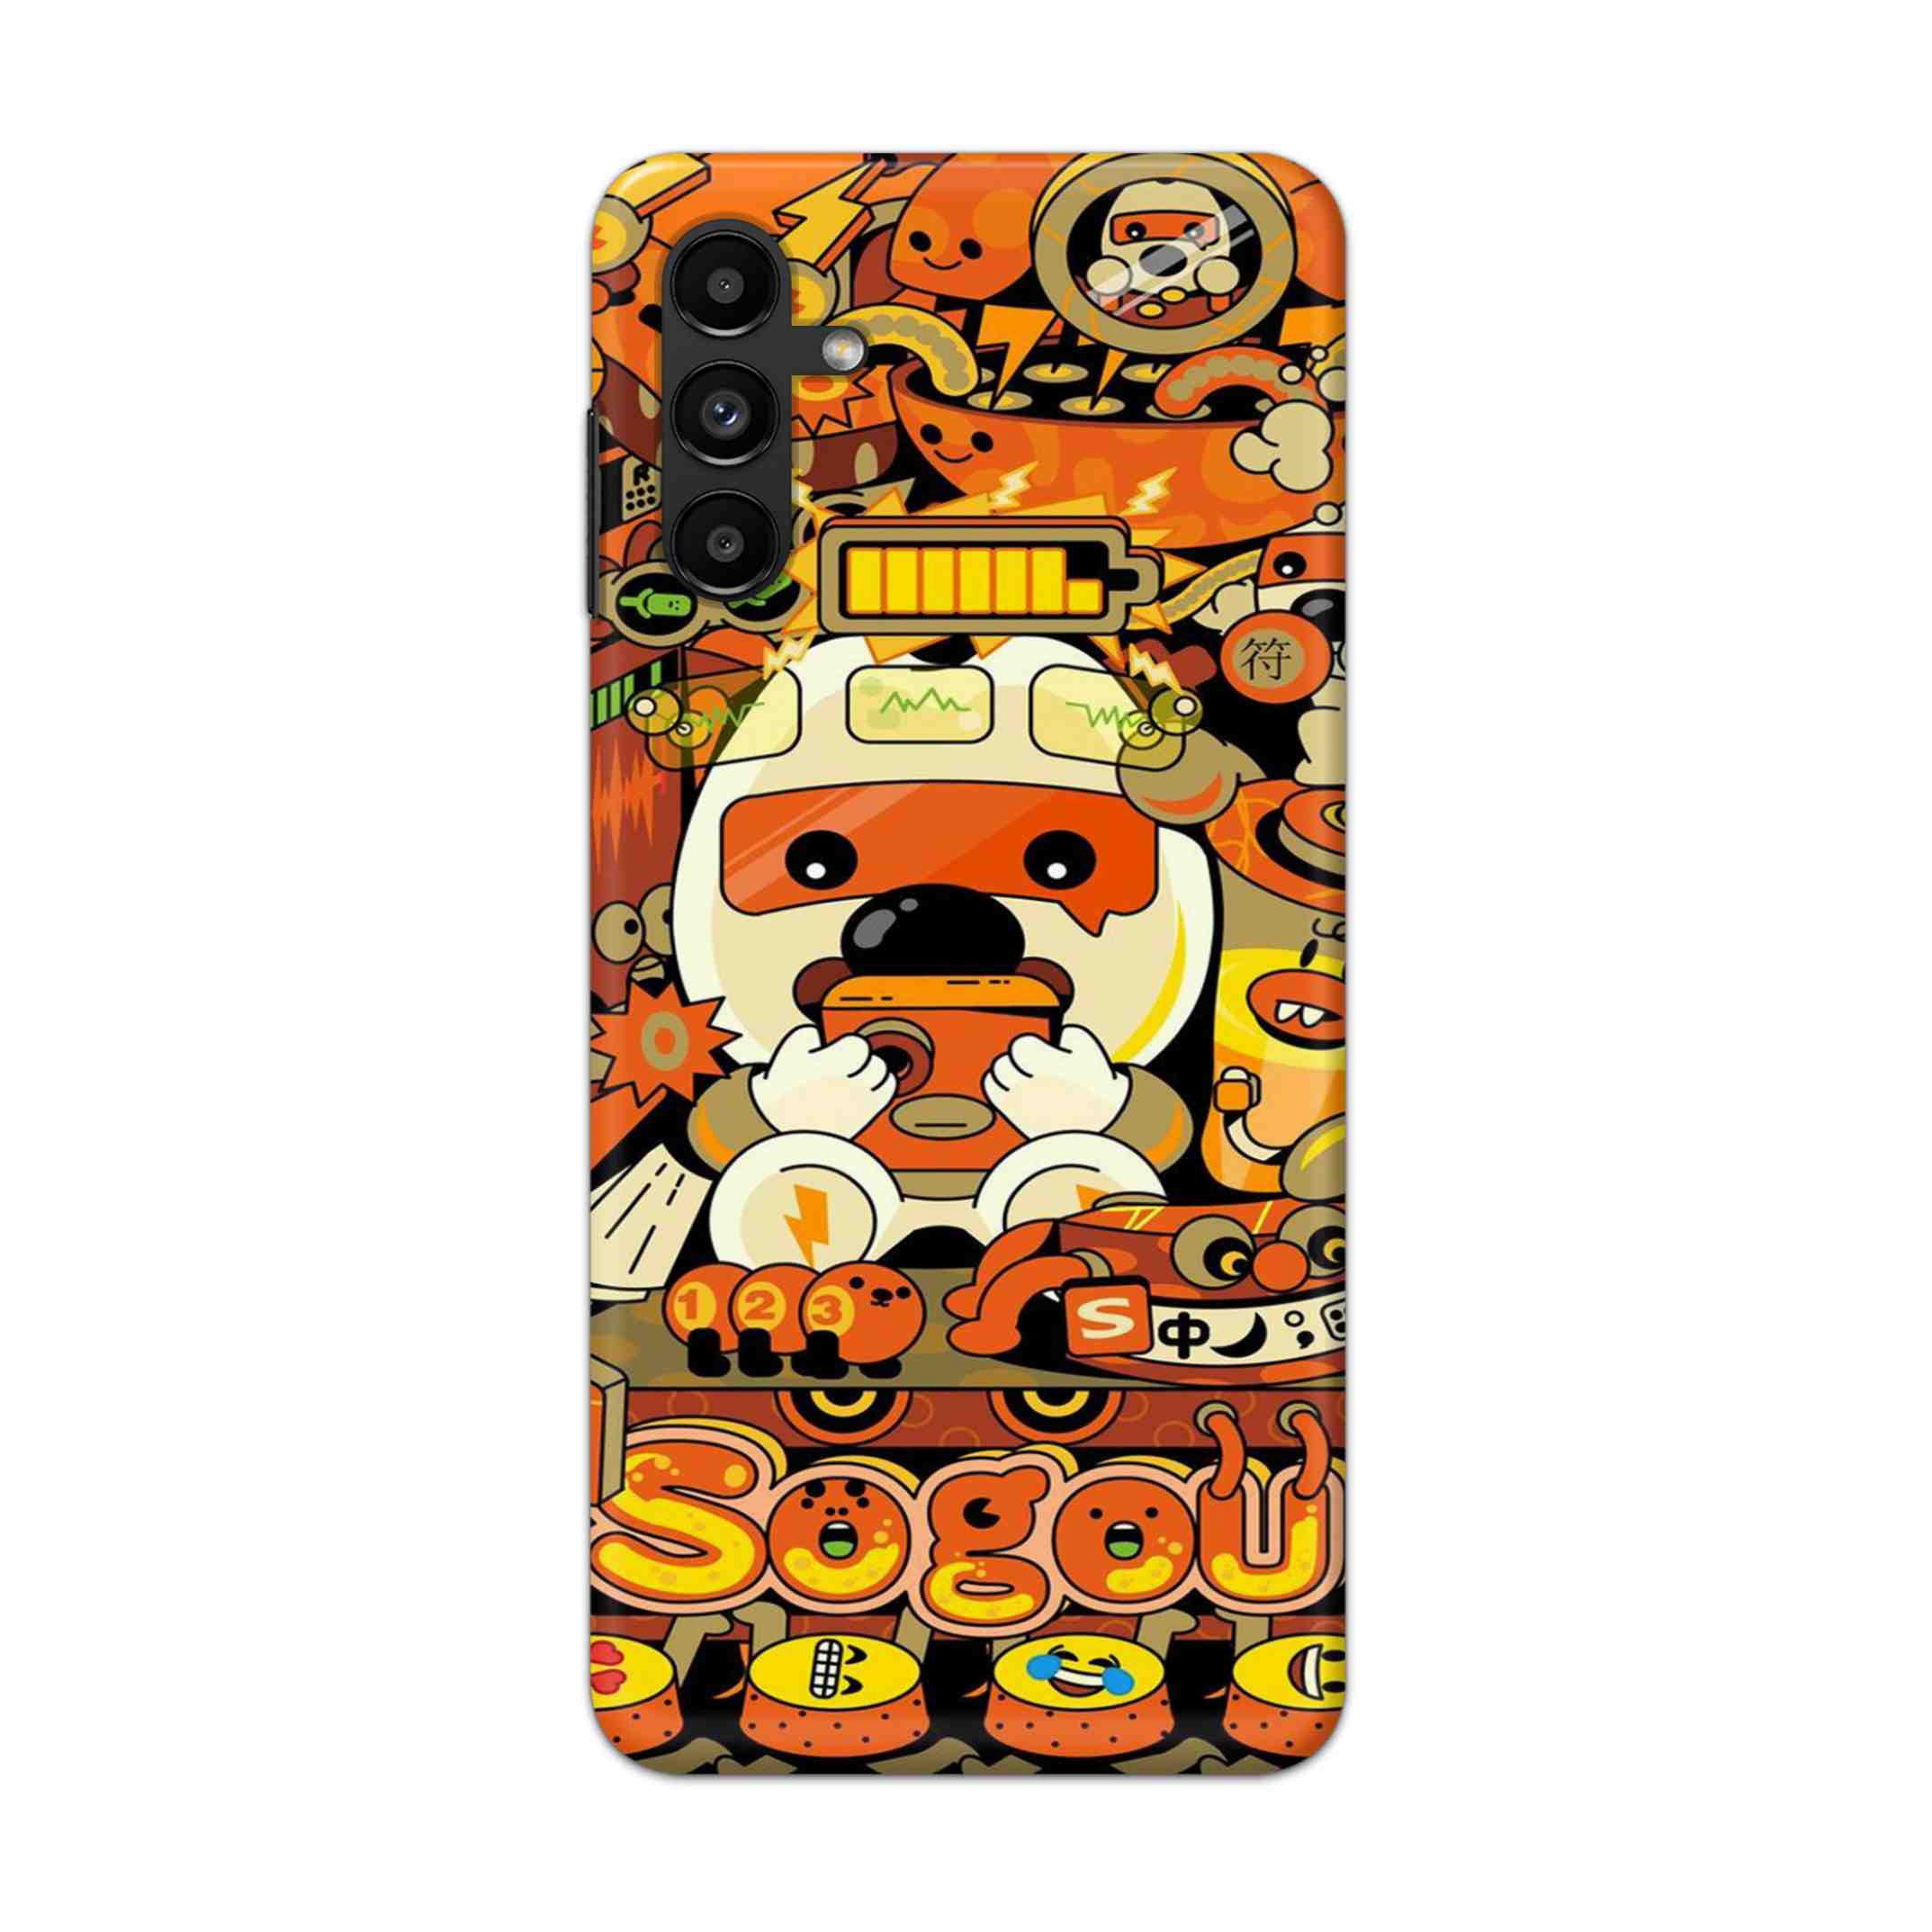 Buy Sogou Hard Back Mobile Phone Case/Cover For Galaxy A13 (5G) Online